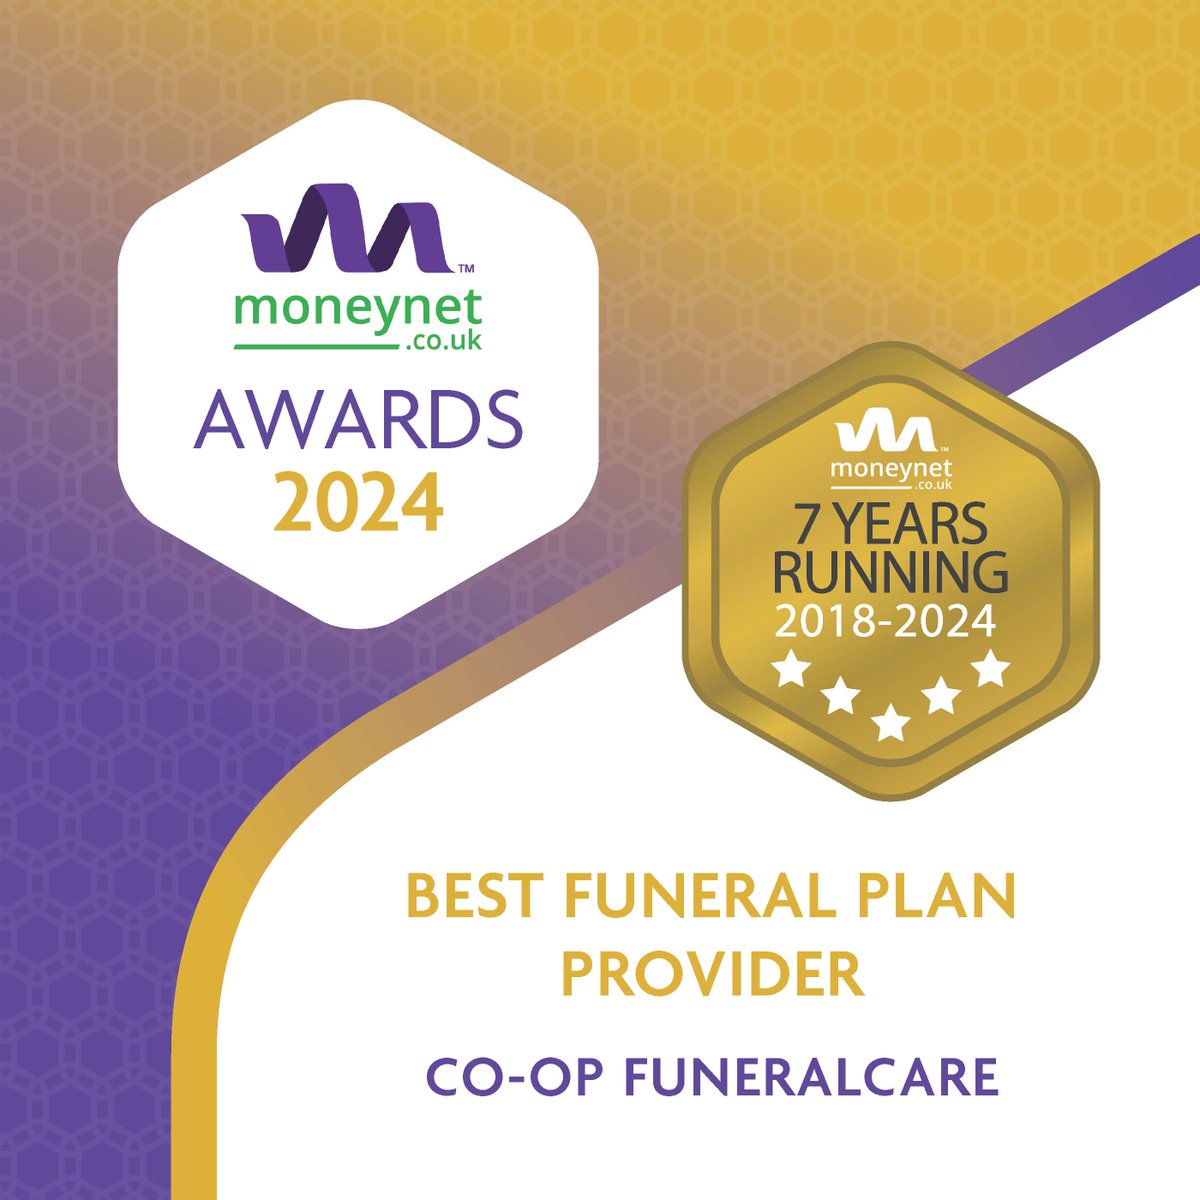 Congratulations to the team at @CoopFuneralcare for winning 'Best Funeral Plan Provider' for 7 years running!